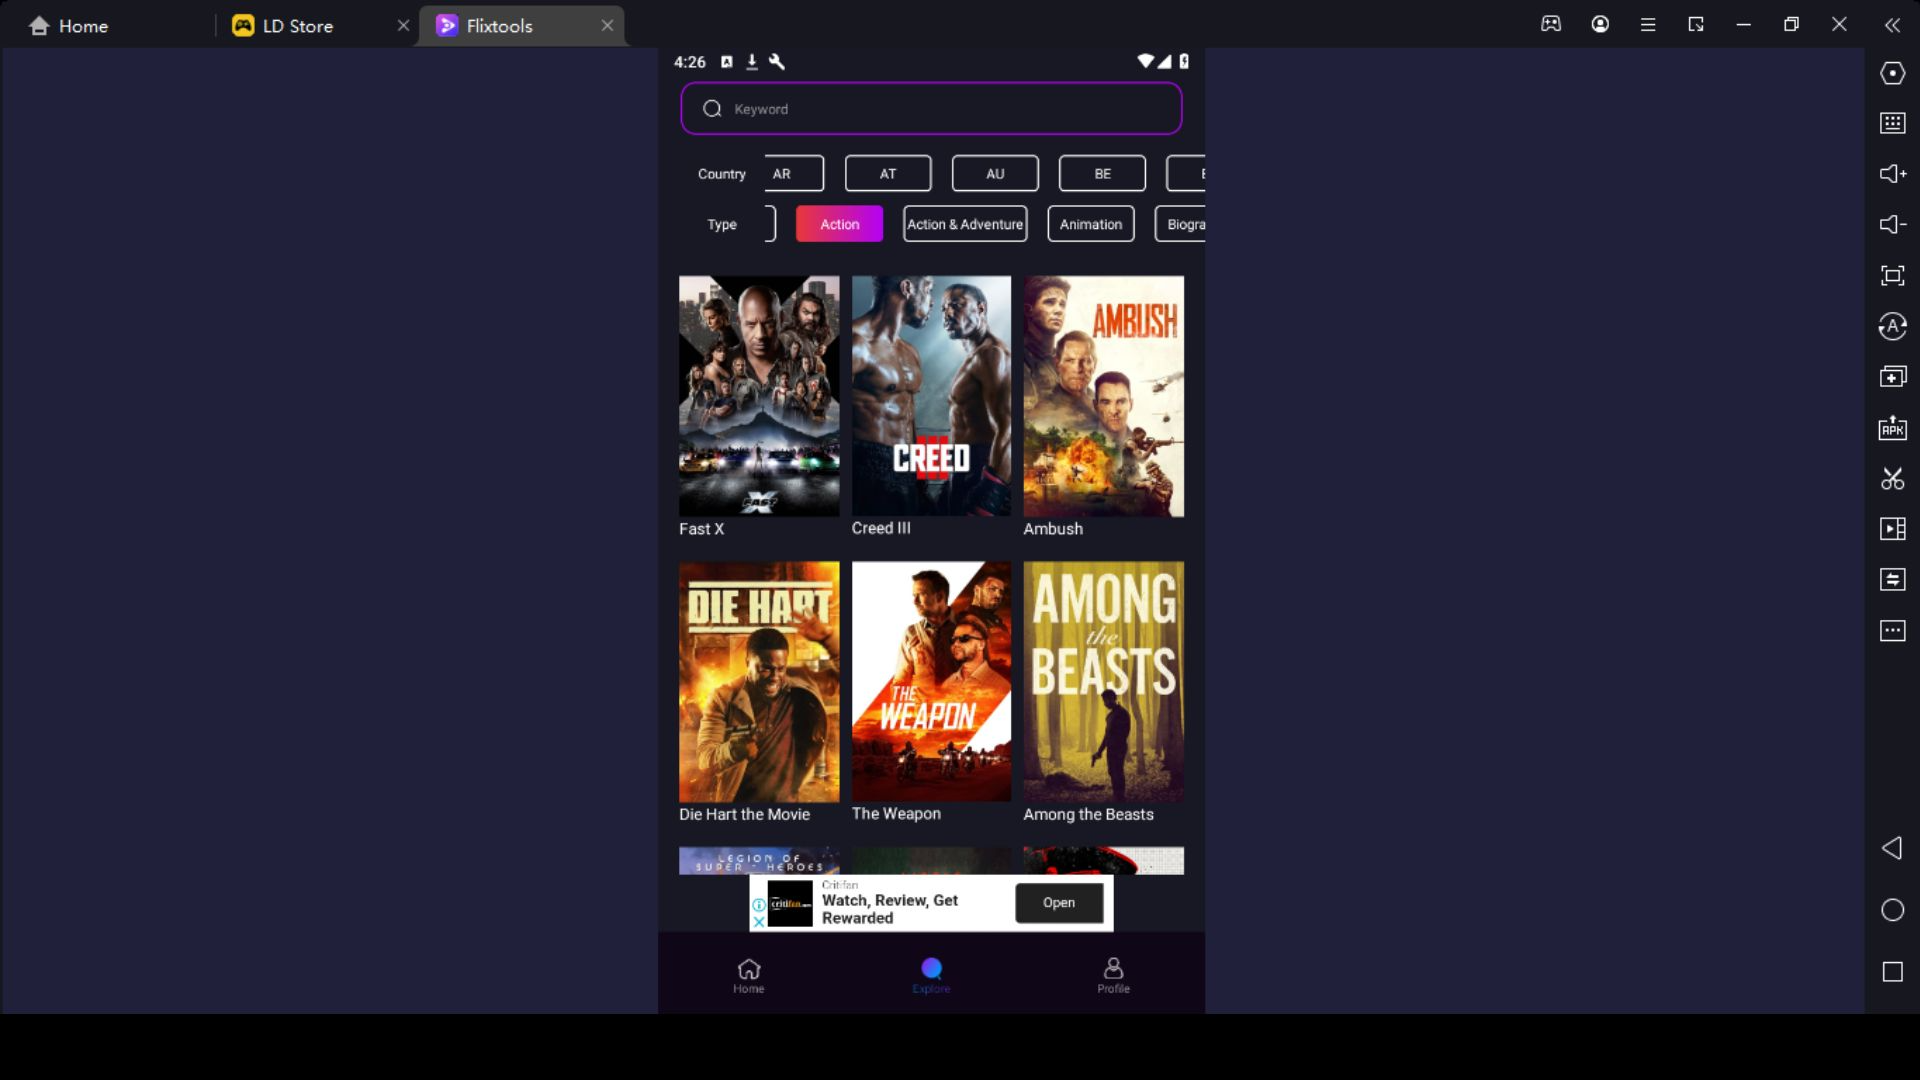 Why I Can't Access Certain Features in Flixtools: Movies Box & TV